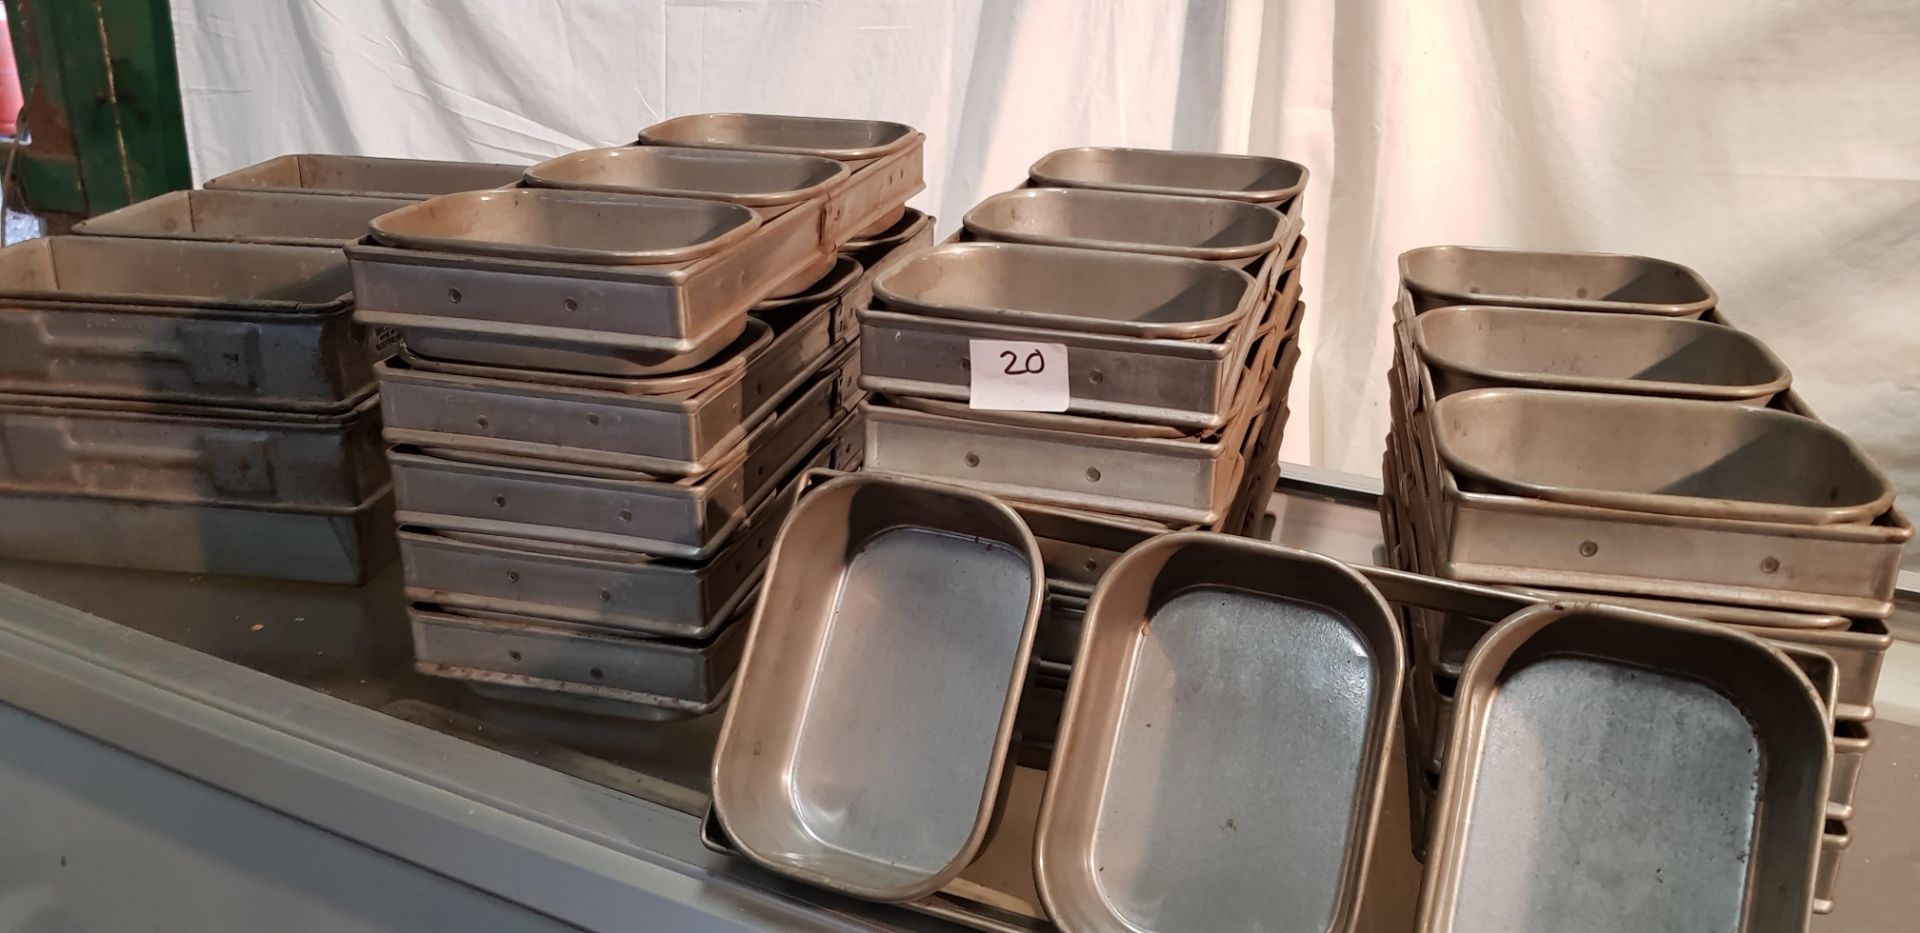 Stainless Steel Bread Tins